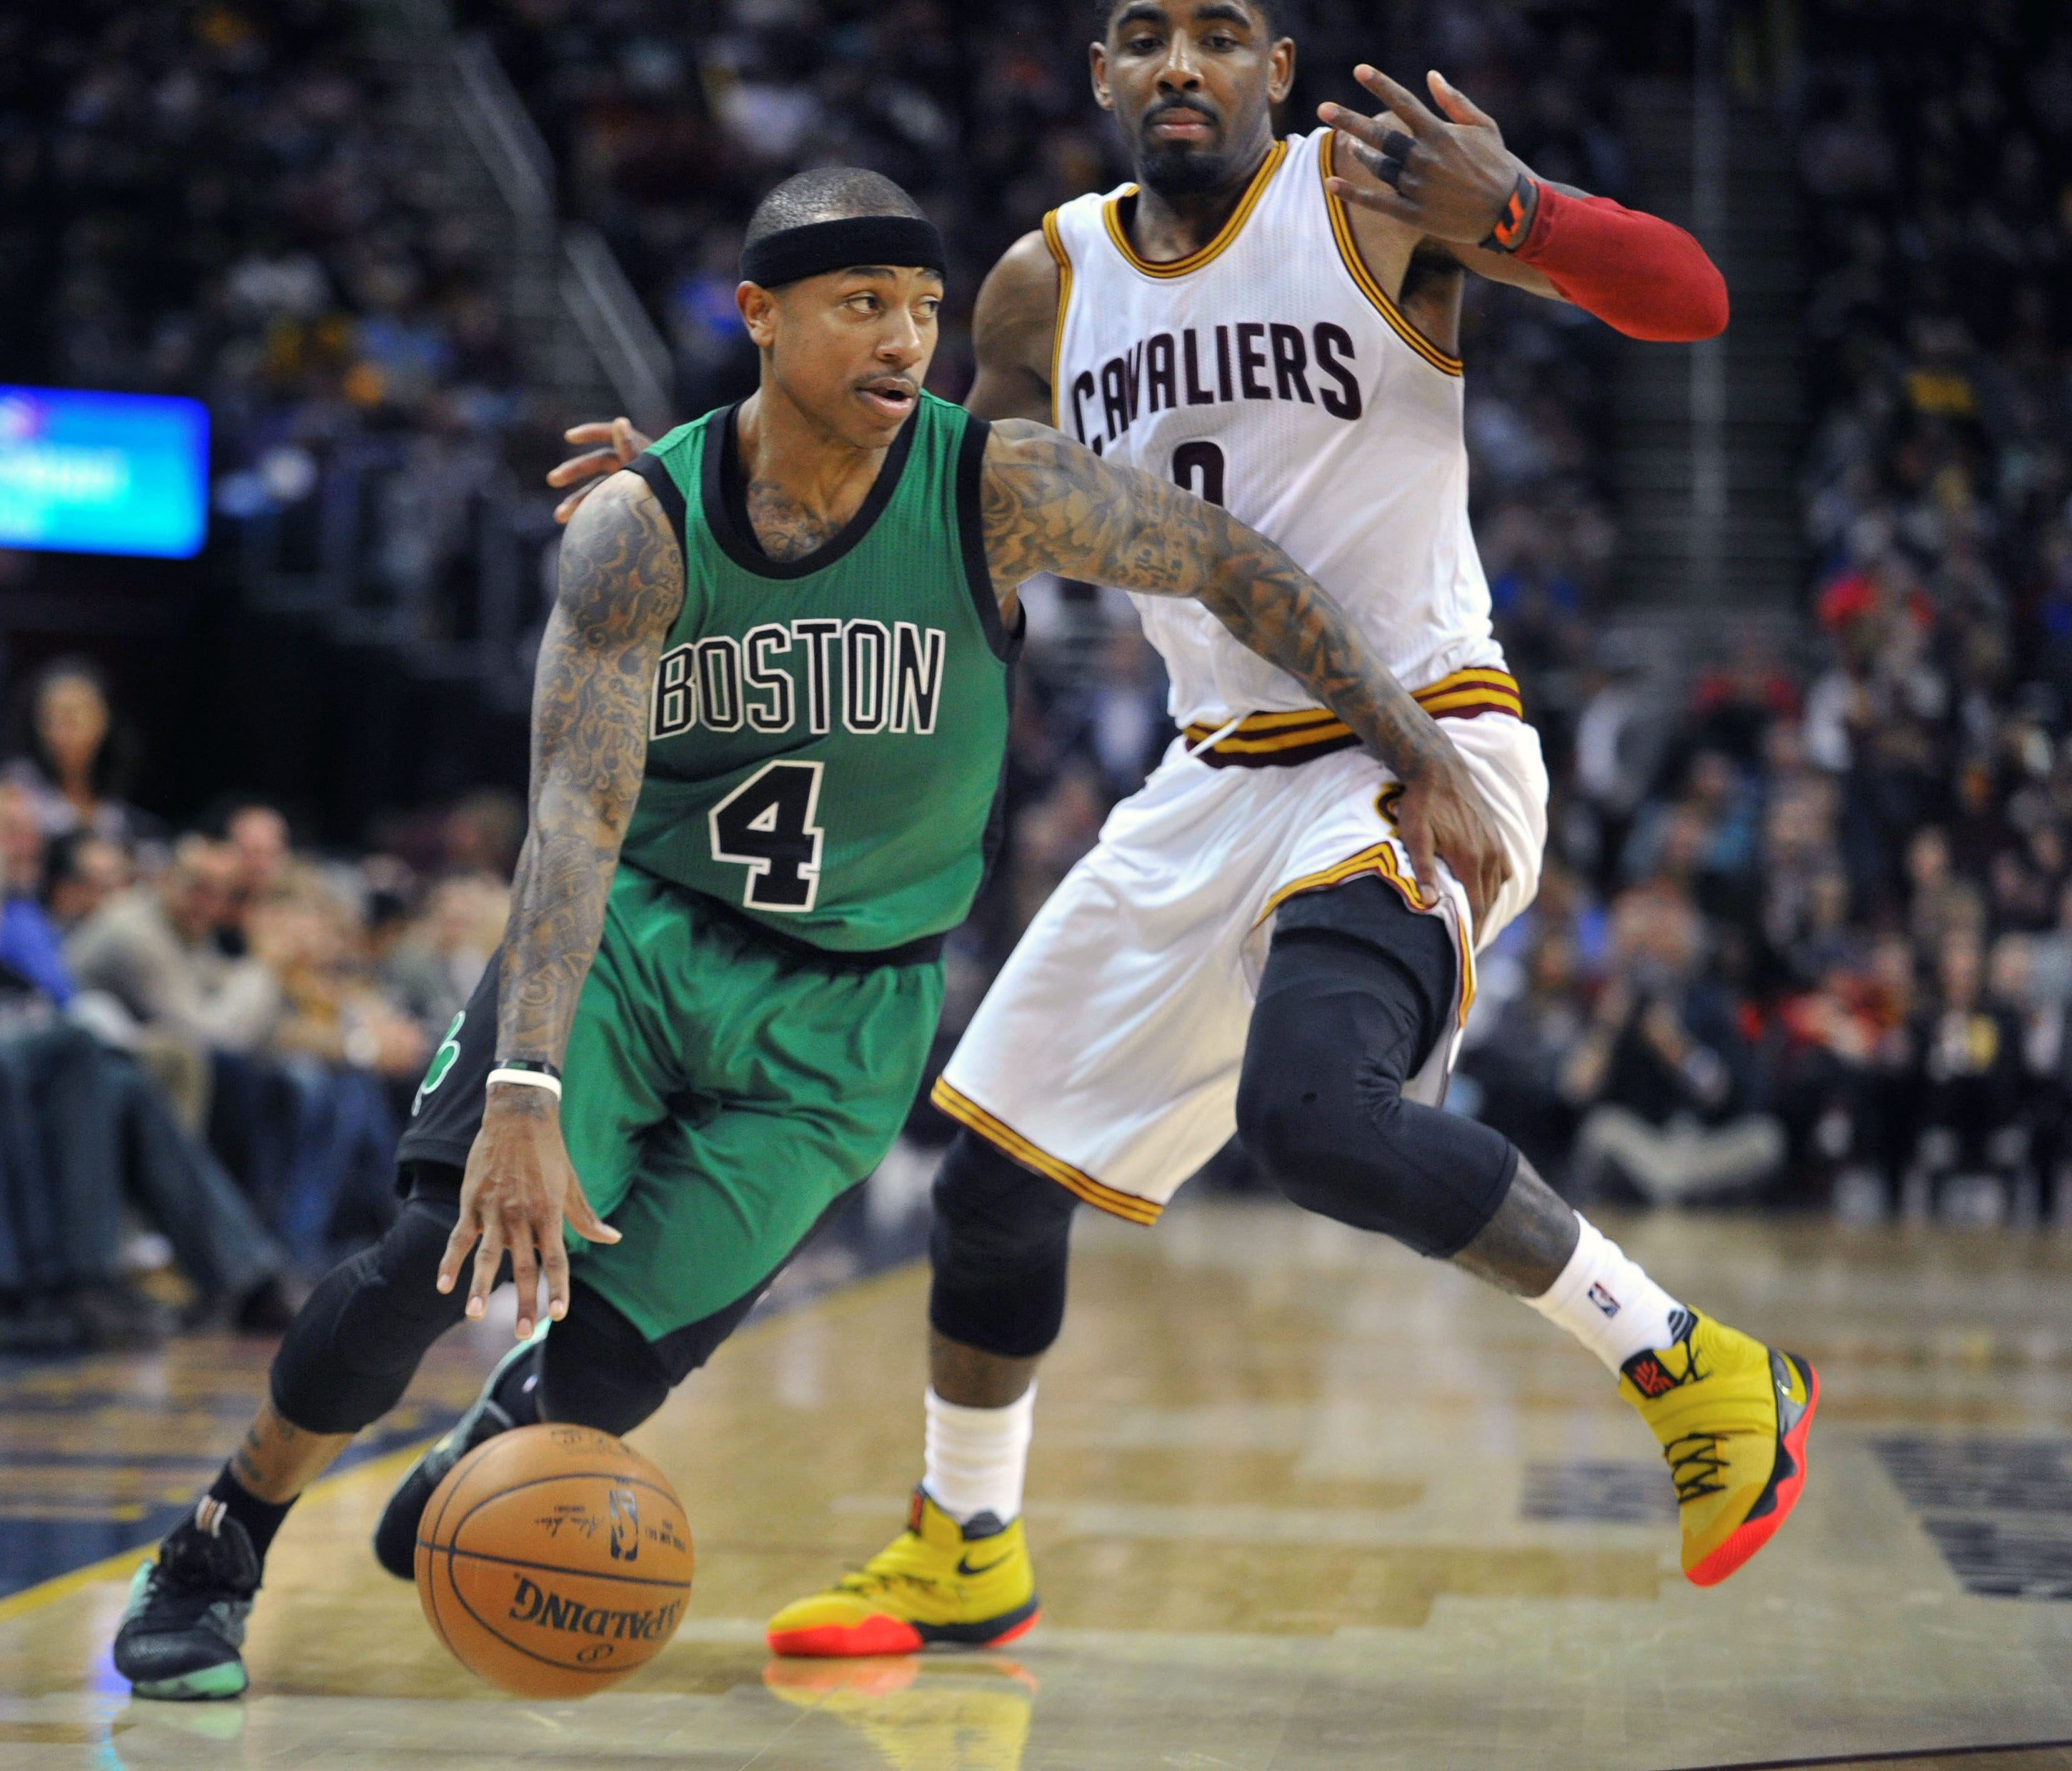 Former Boston Celtics guard Isaiah Thomas dribbles past former Cleveland Cavaliers guard Kyrie Irving.